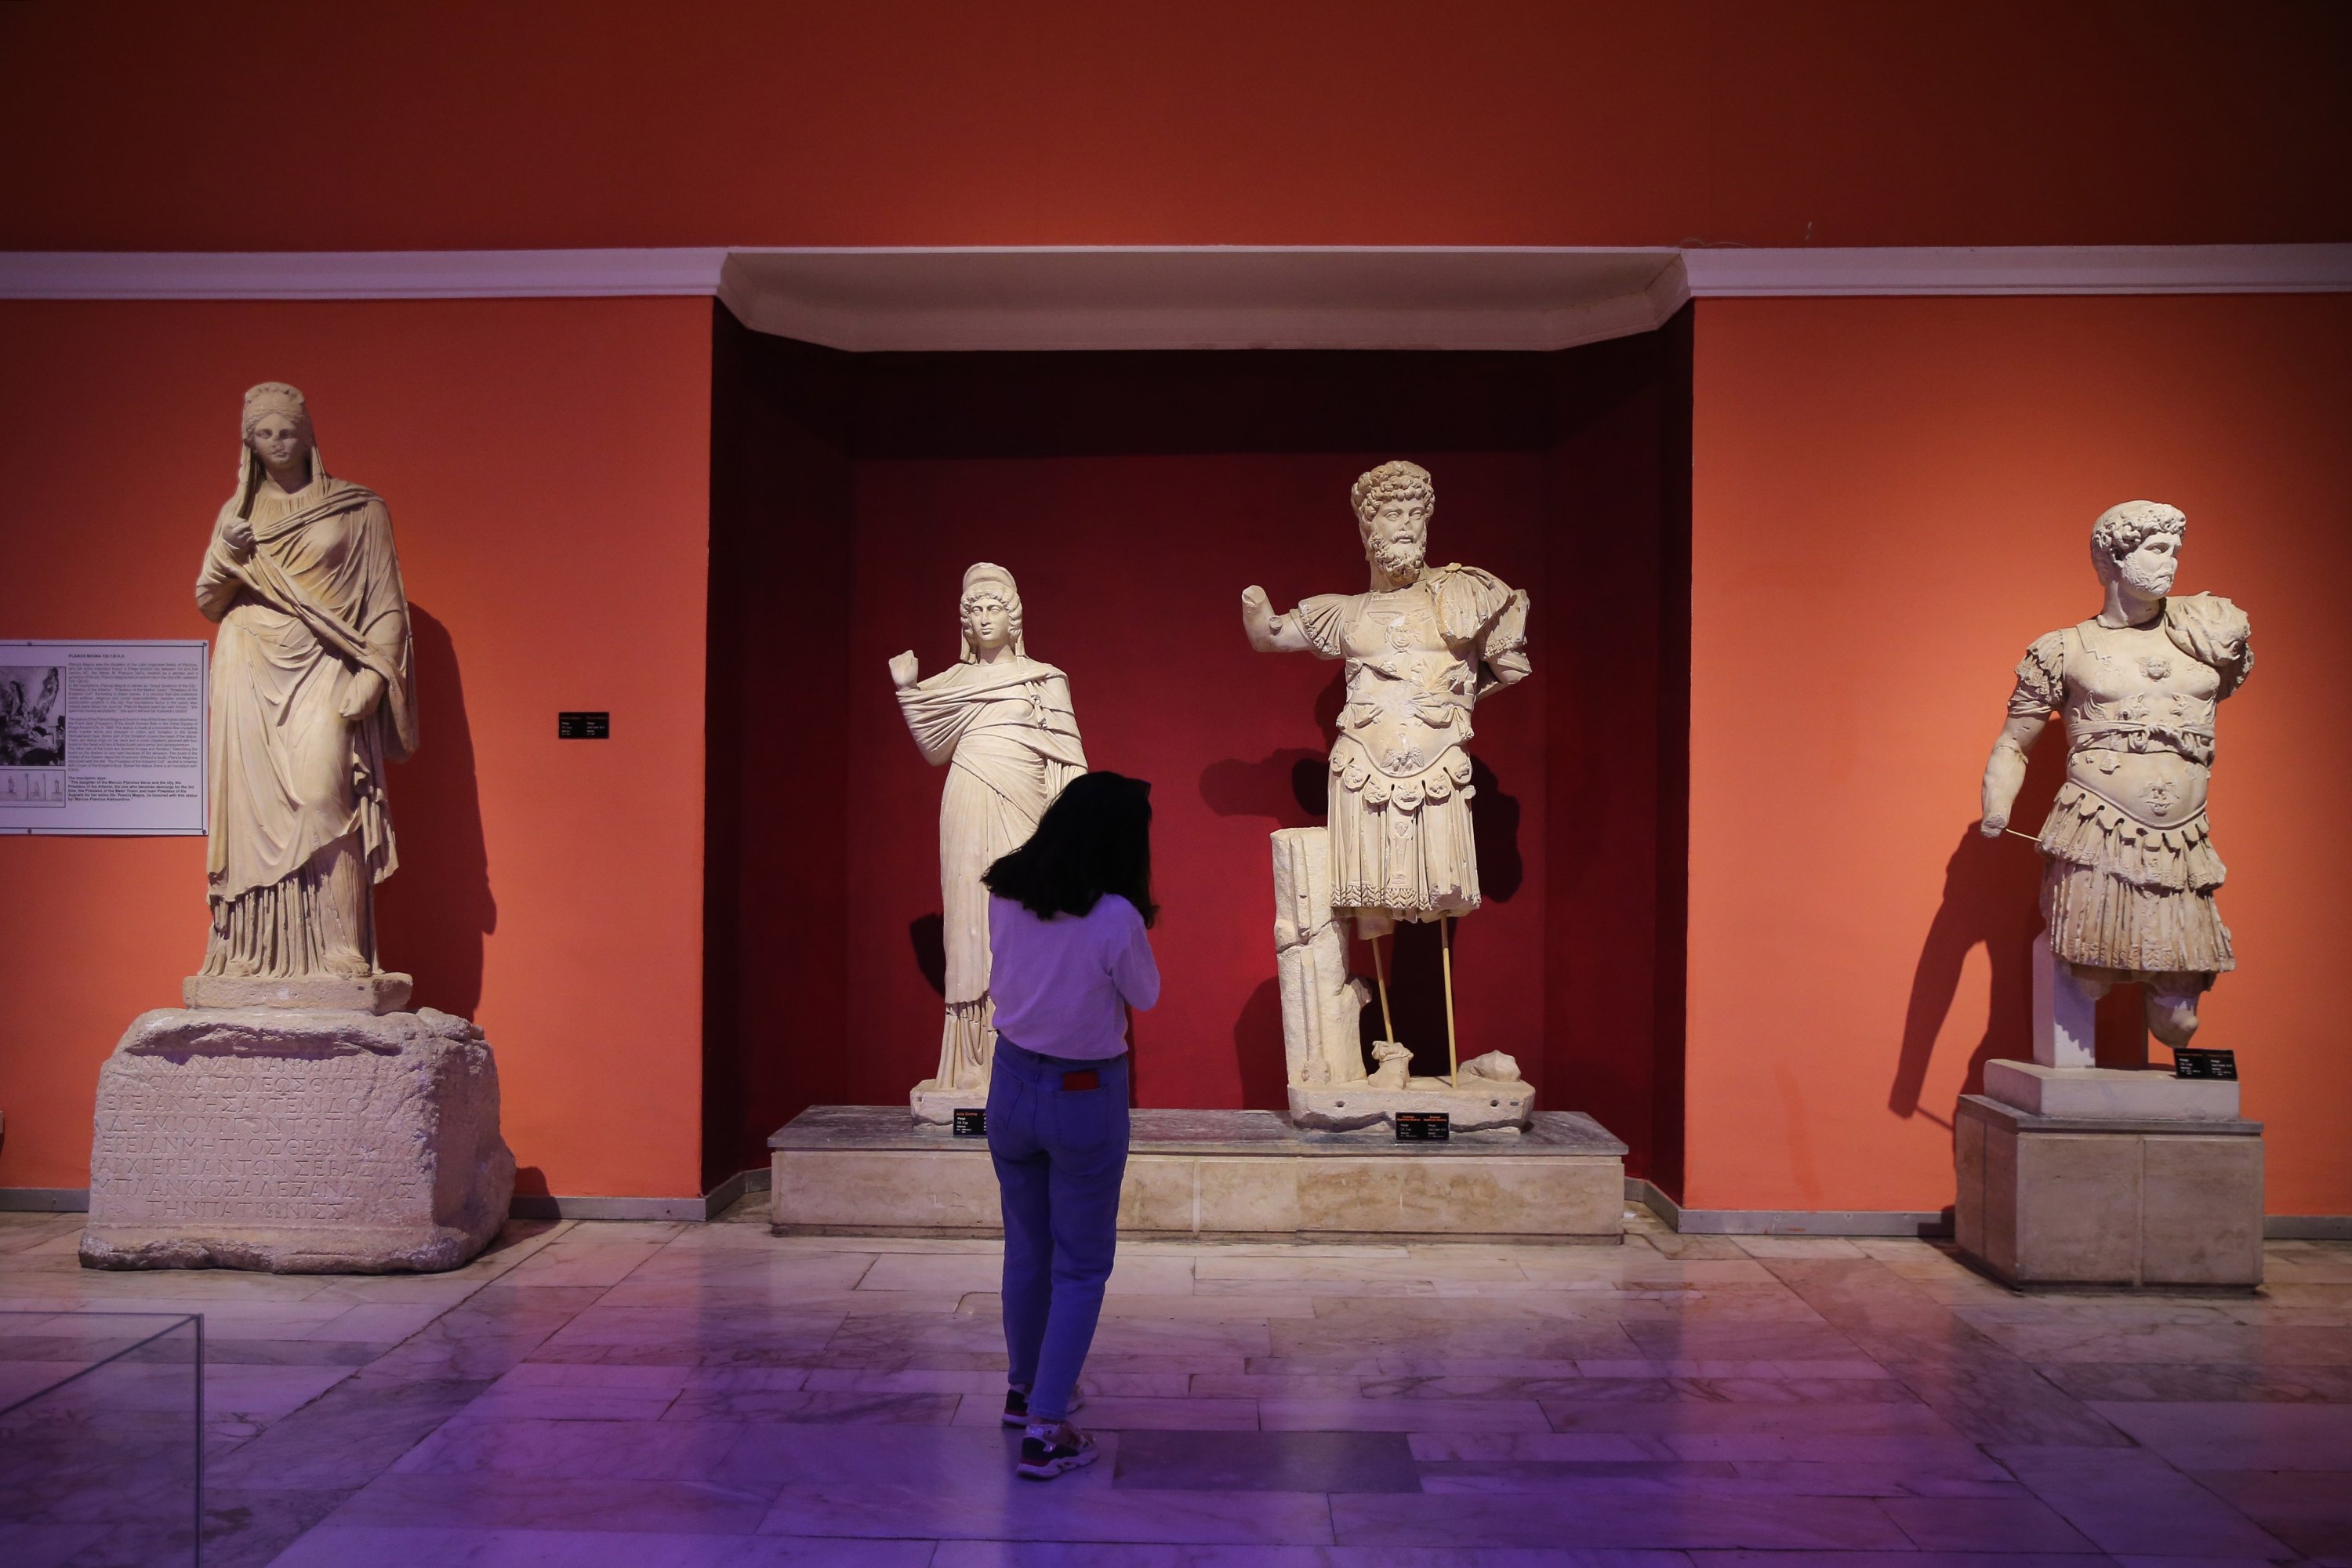 A visitor examines sculptures in the Antalya Museum, Antalya, southern Turkey, April 16, 2021. (AA Photo)